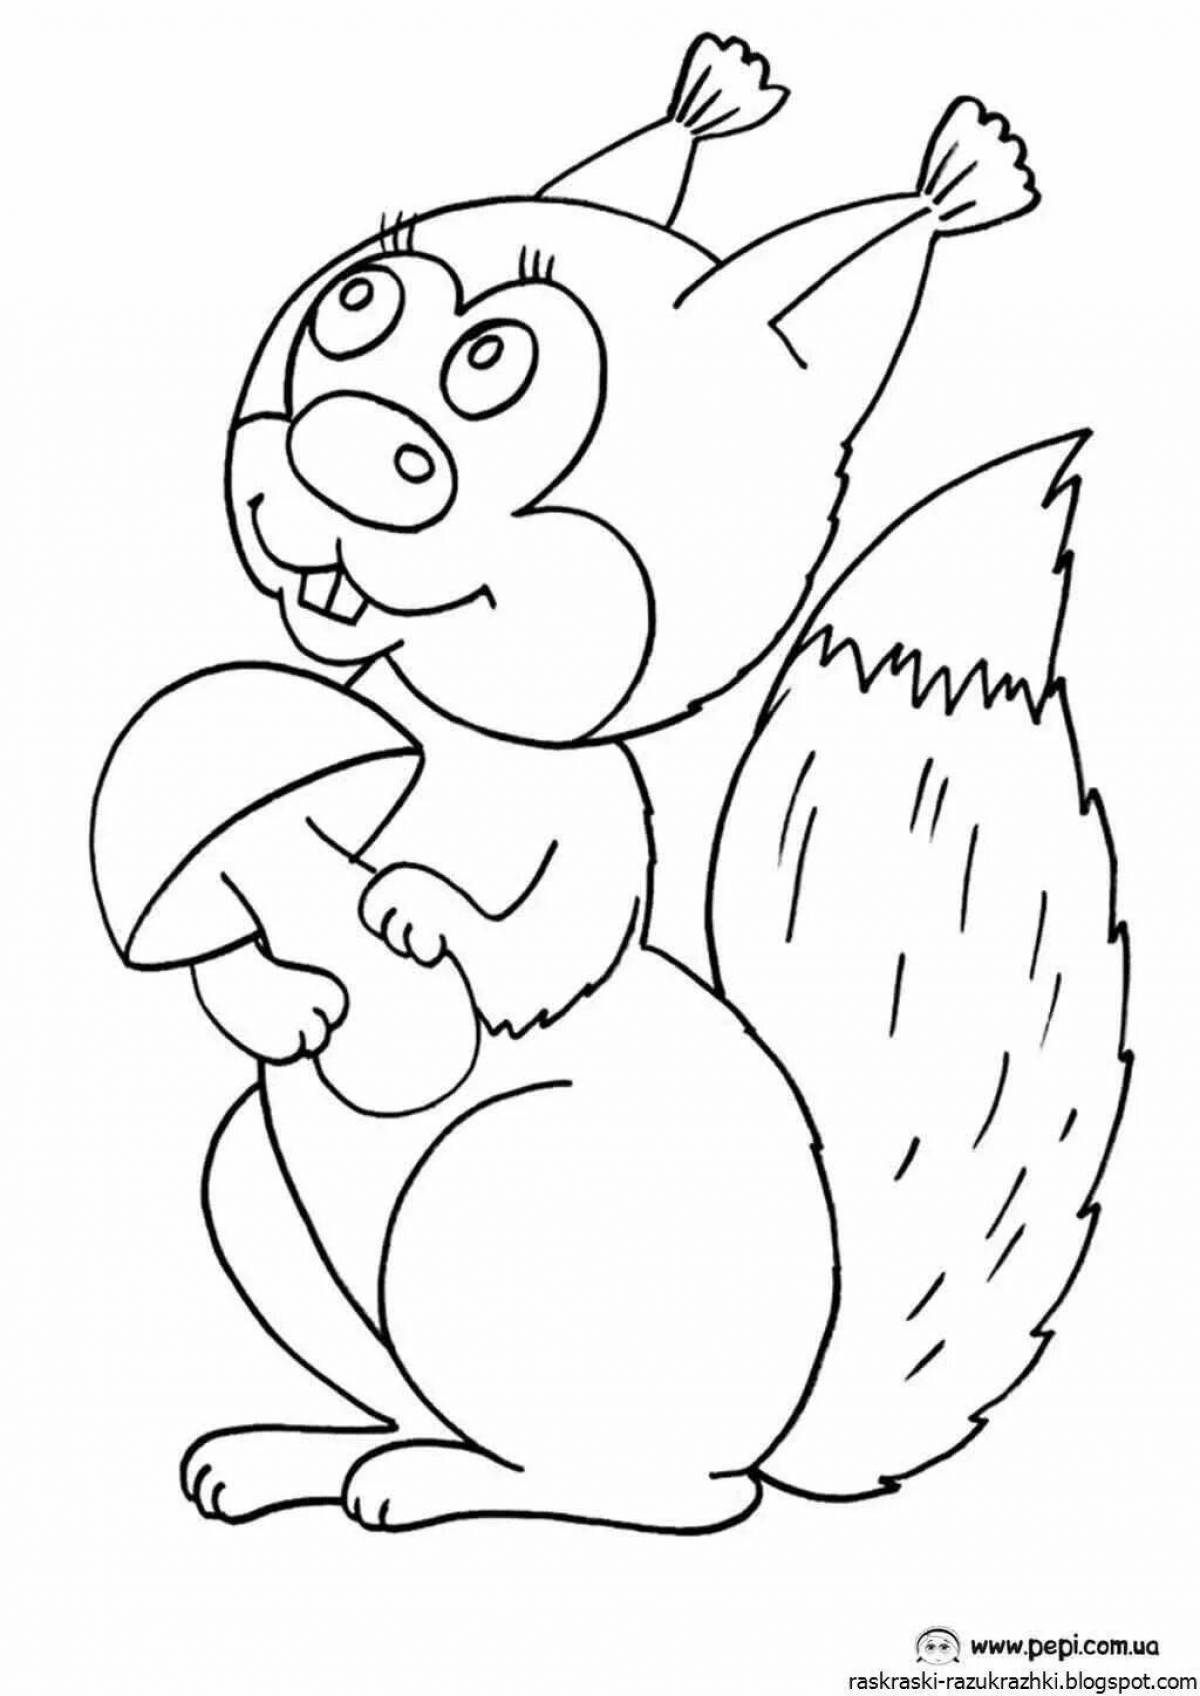 Zany squirrel coloring book for kids